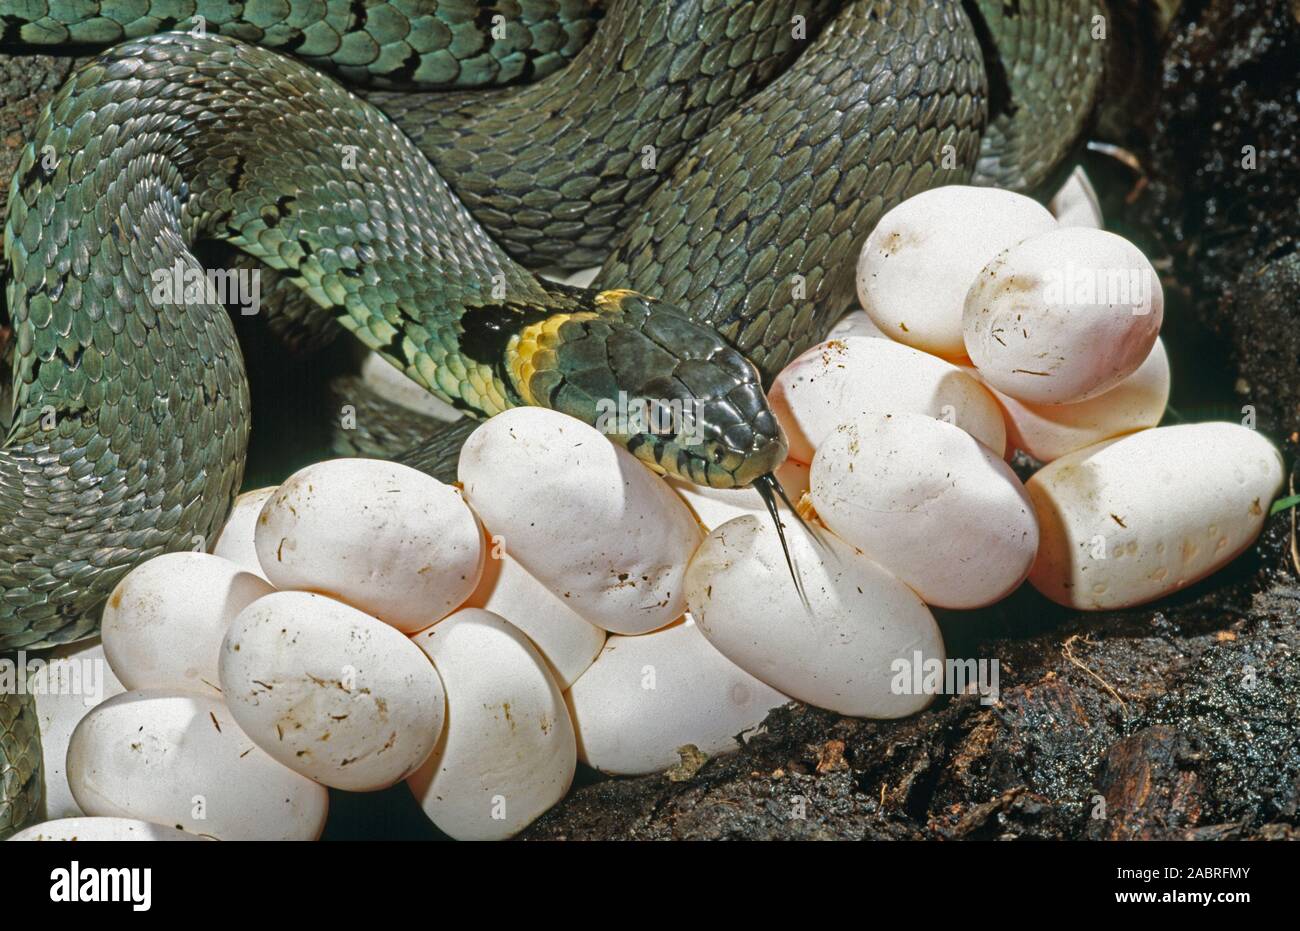 Grass Snake (Natrix natrix). Female with a clutch of eggs laid in a rotting, decomposing, wood pile adjacent to working timber yard. Norfolk. July. Stock Photo